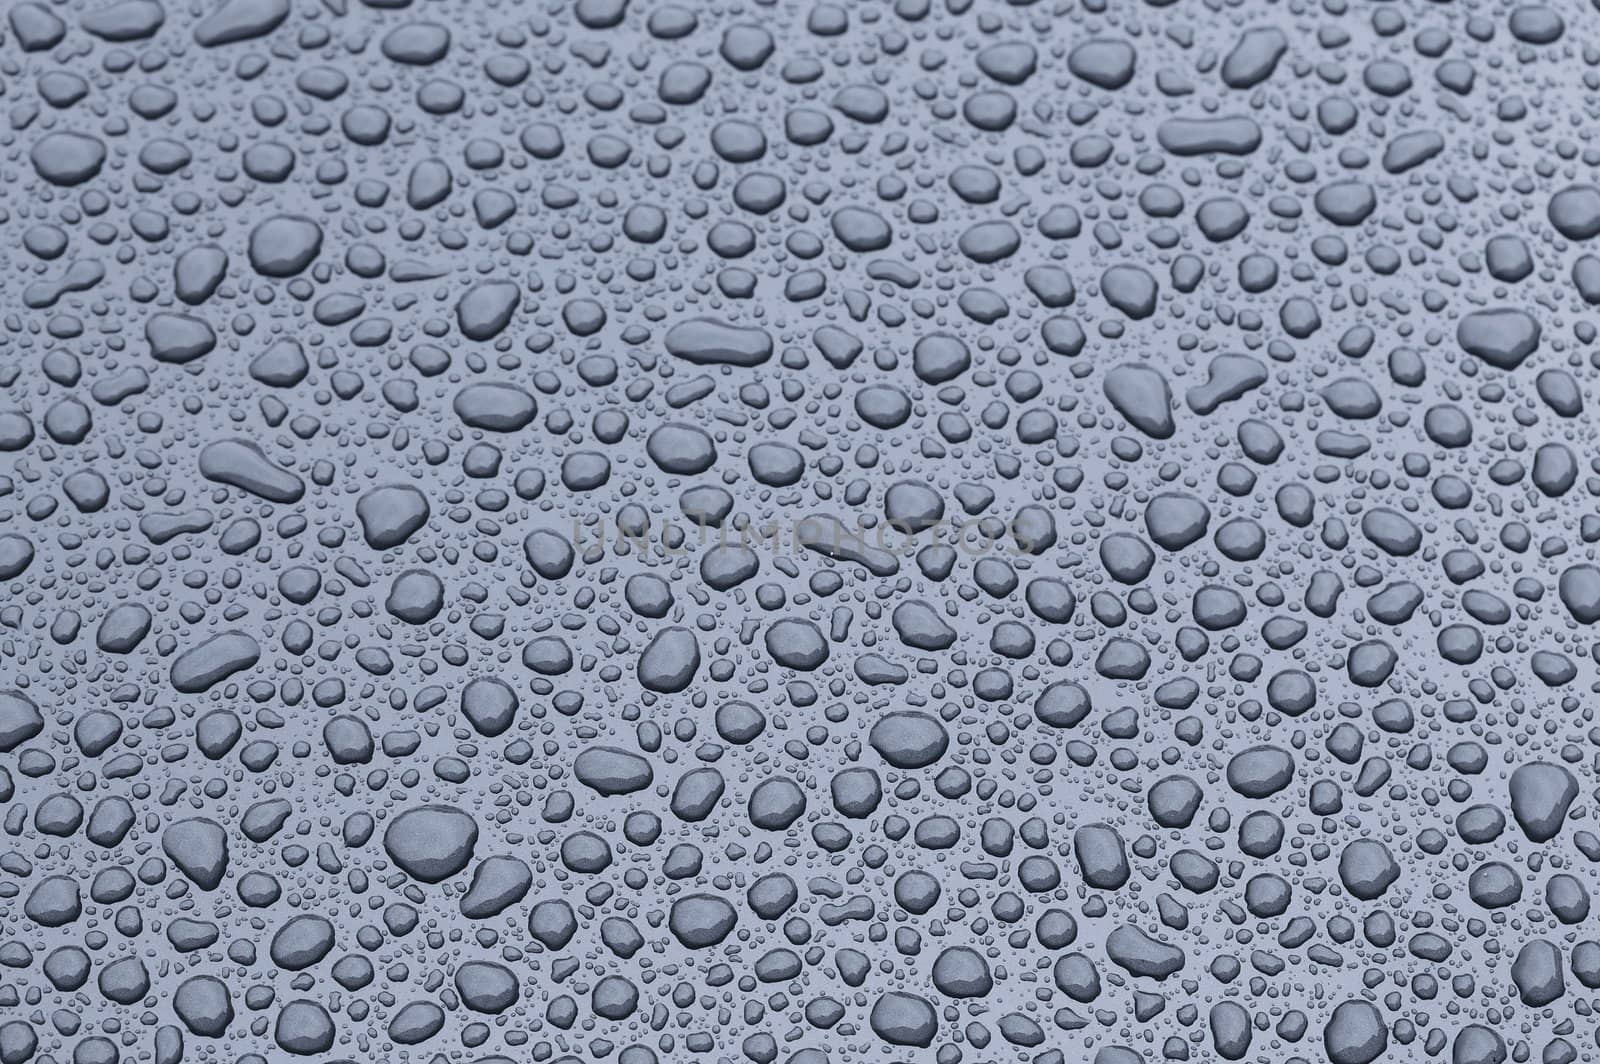 a picture of water drops on metal surface